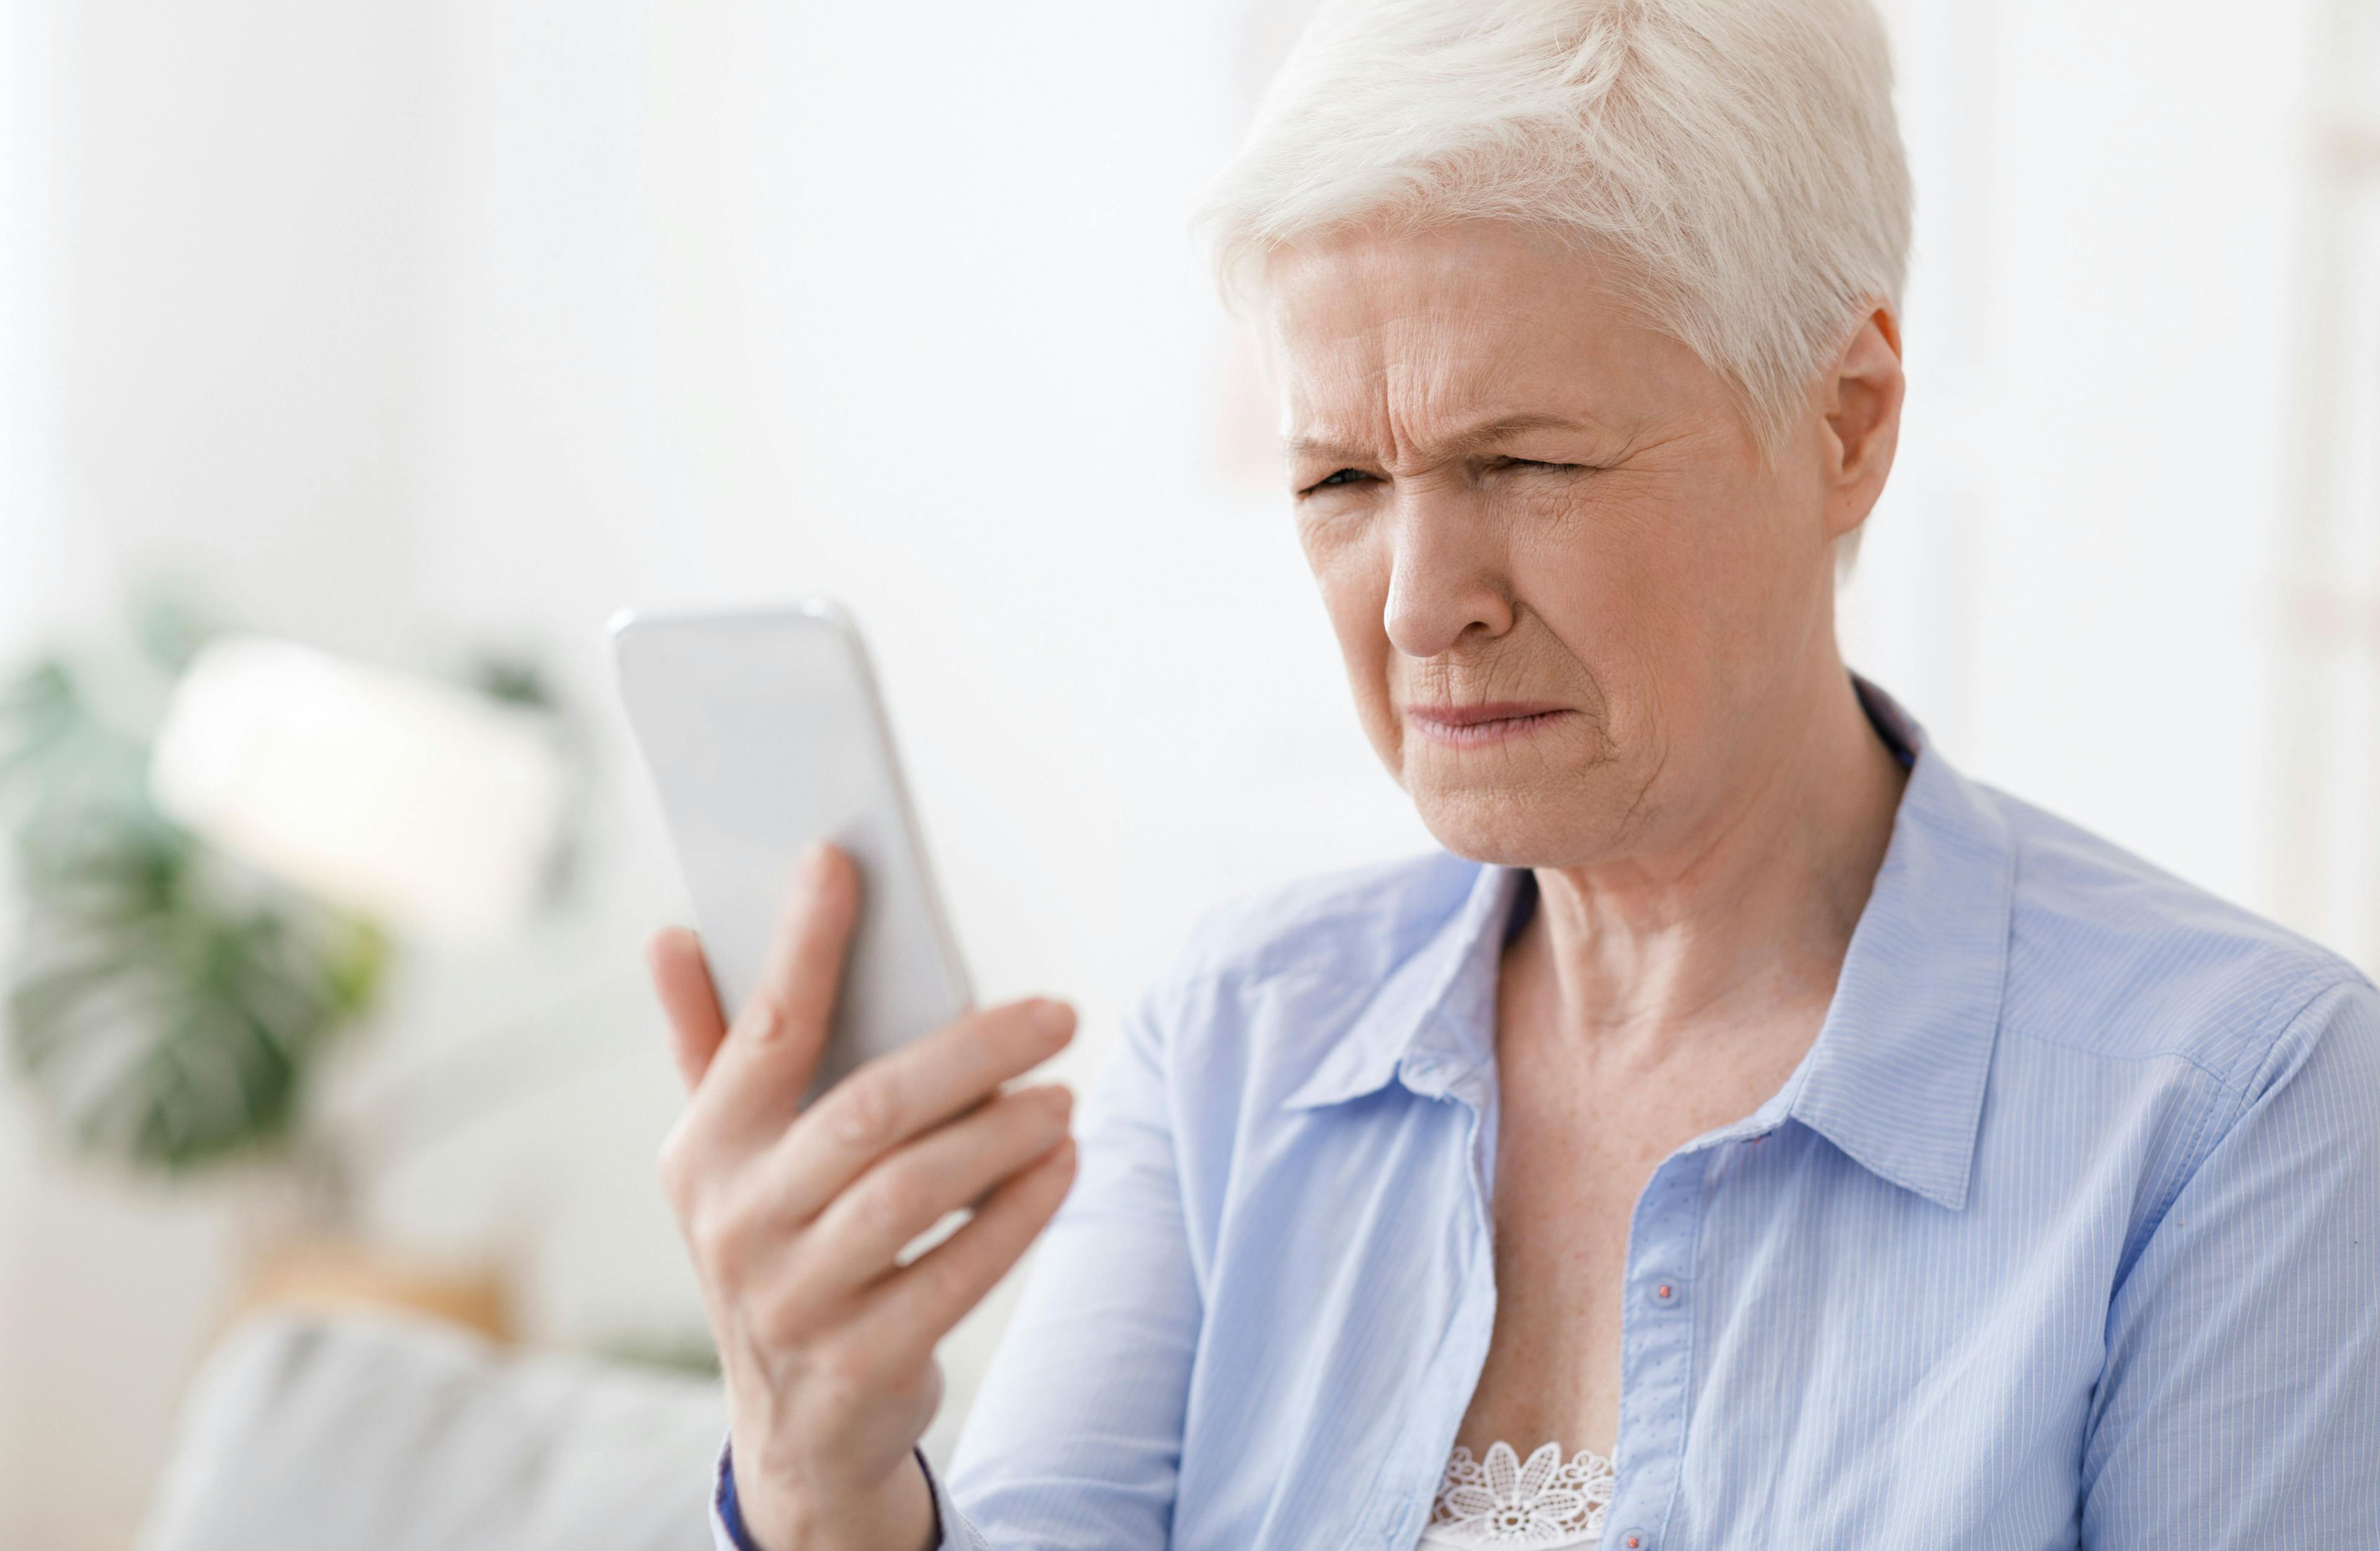 More Older Adults Plan to Use Digital Health Technologies as They 'Age in Place'